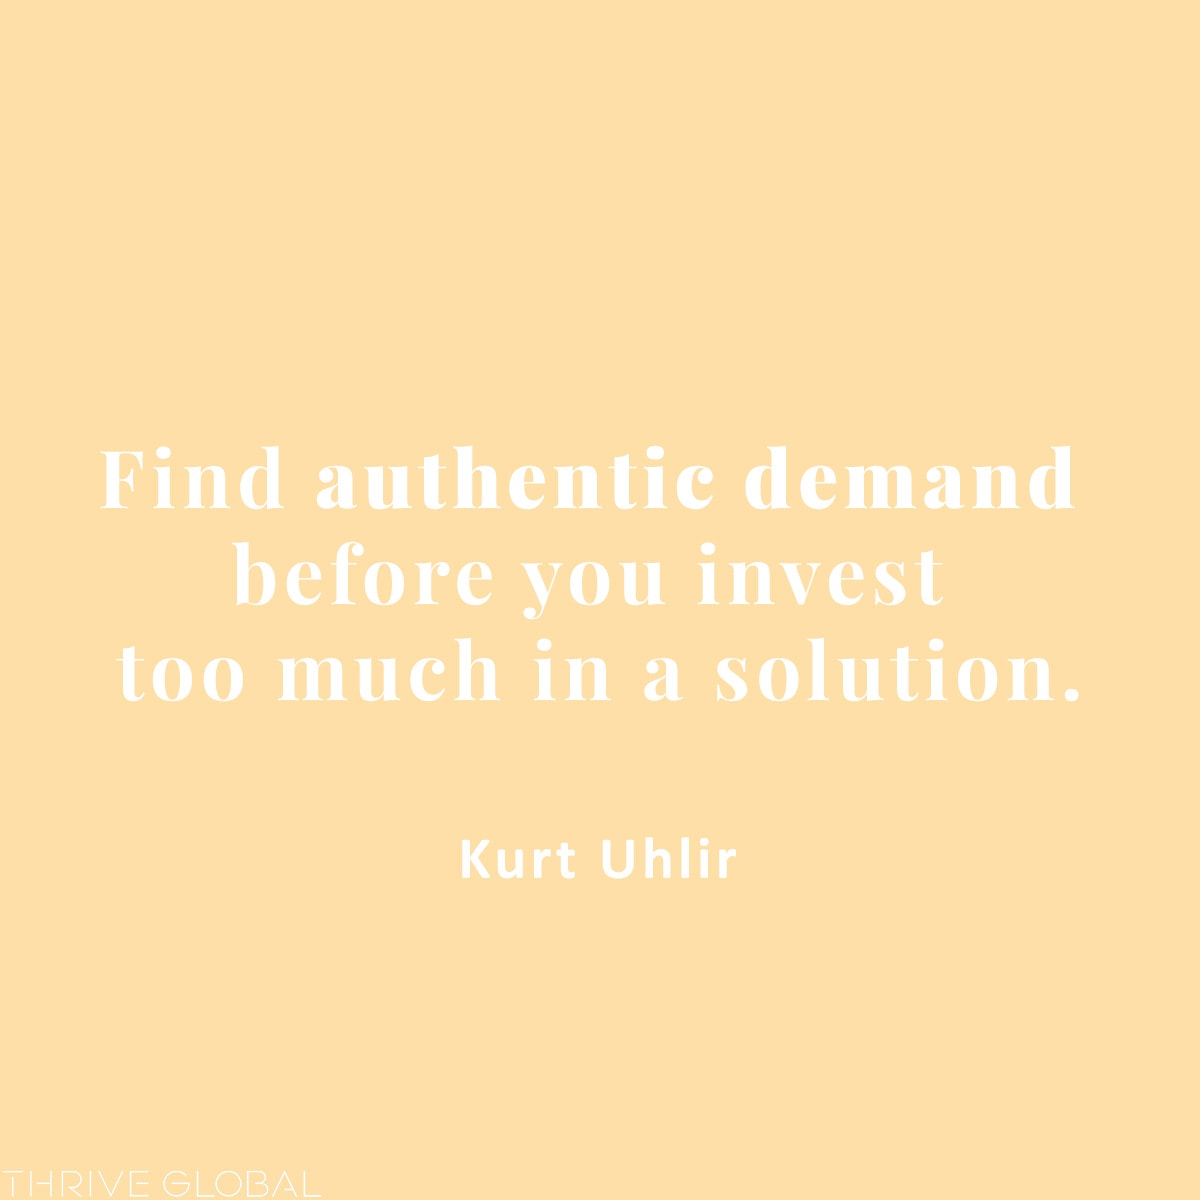 Find authentic demand before you invest too much in a solution.